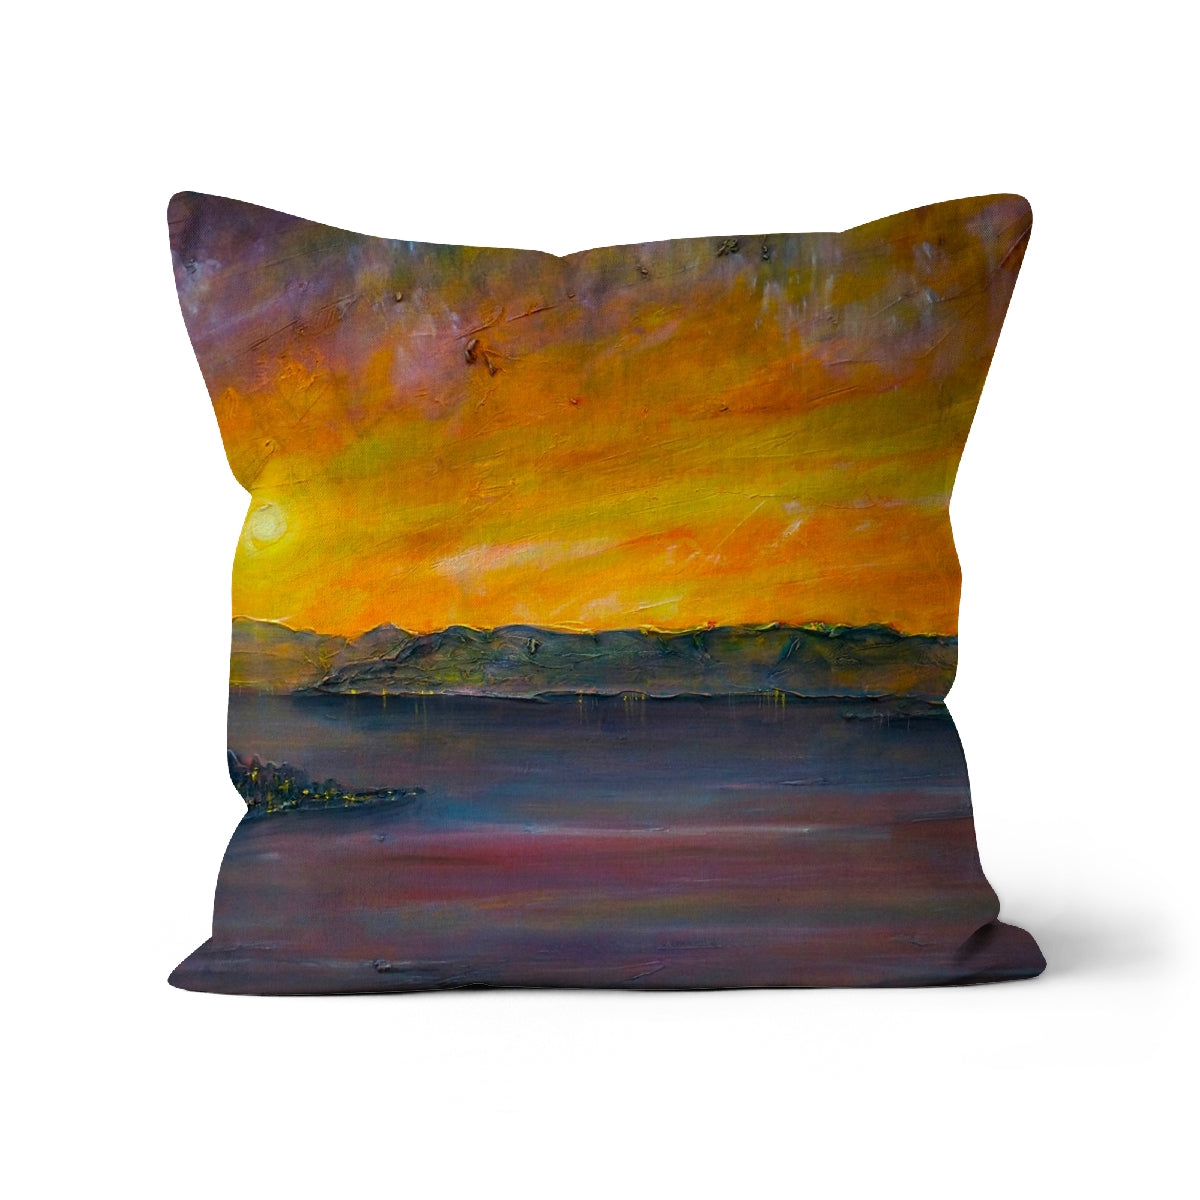 Sunset Over Gourock Art Gifts Cushion-Cushions-River Clyde Art Gallery-Canvas-18"x18"-Paintings, Prints, Homeware, Art Gifts From Scotland By Scottish Artist Kevin Hunter